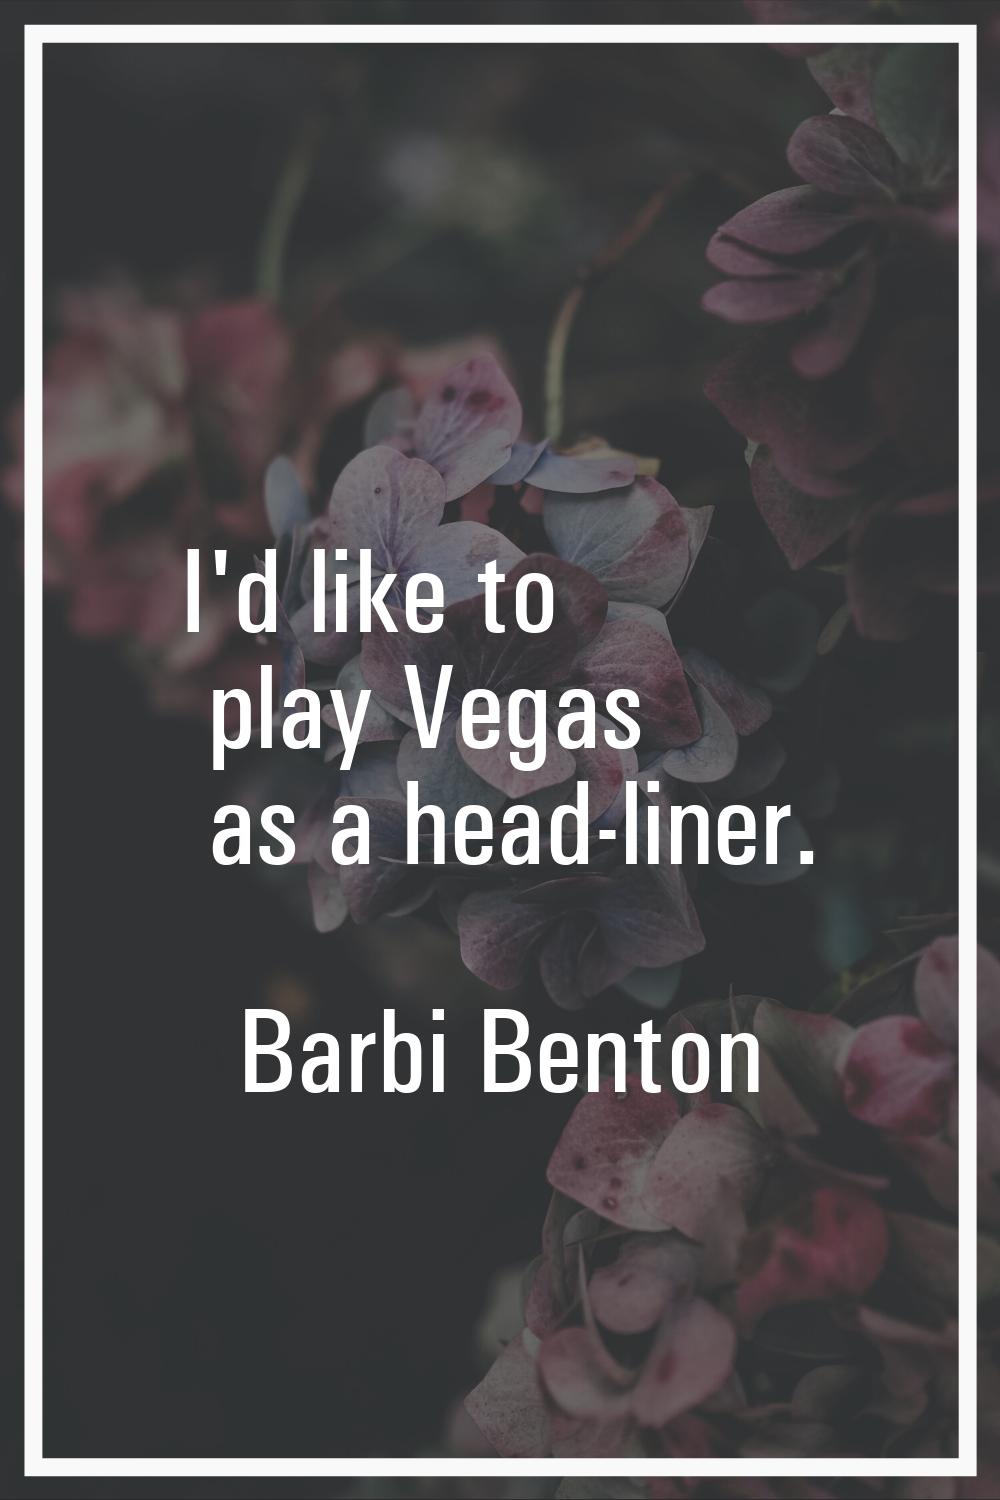 I'd like to play Vegas as a head-liner.